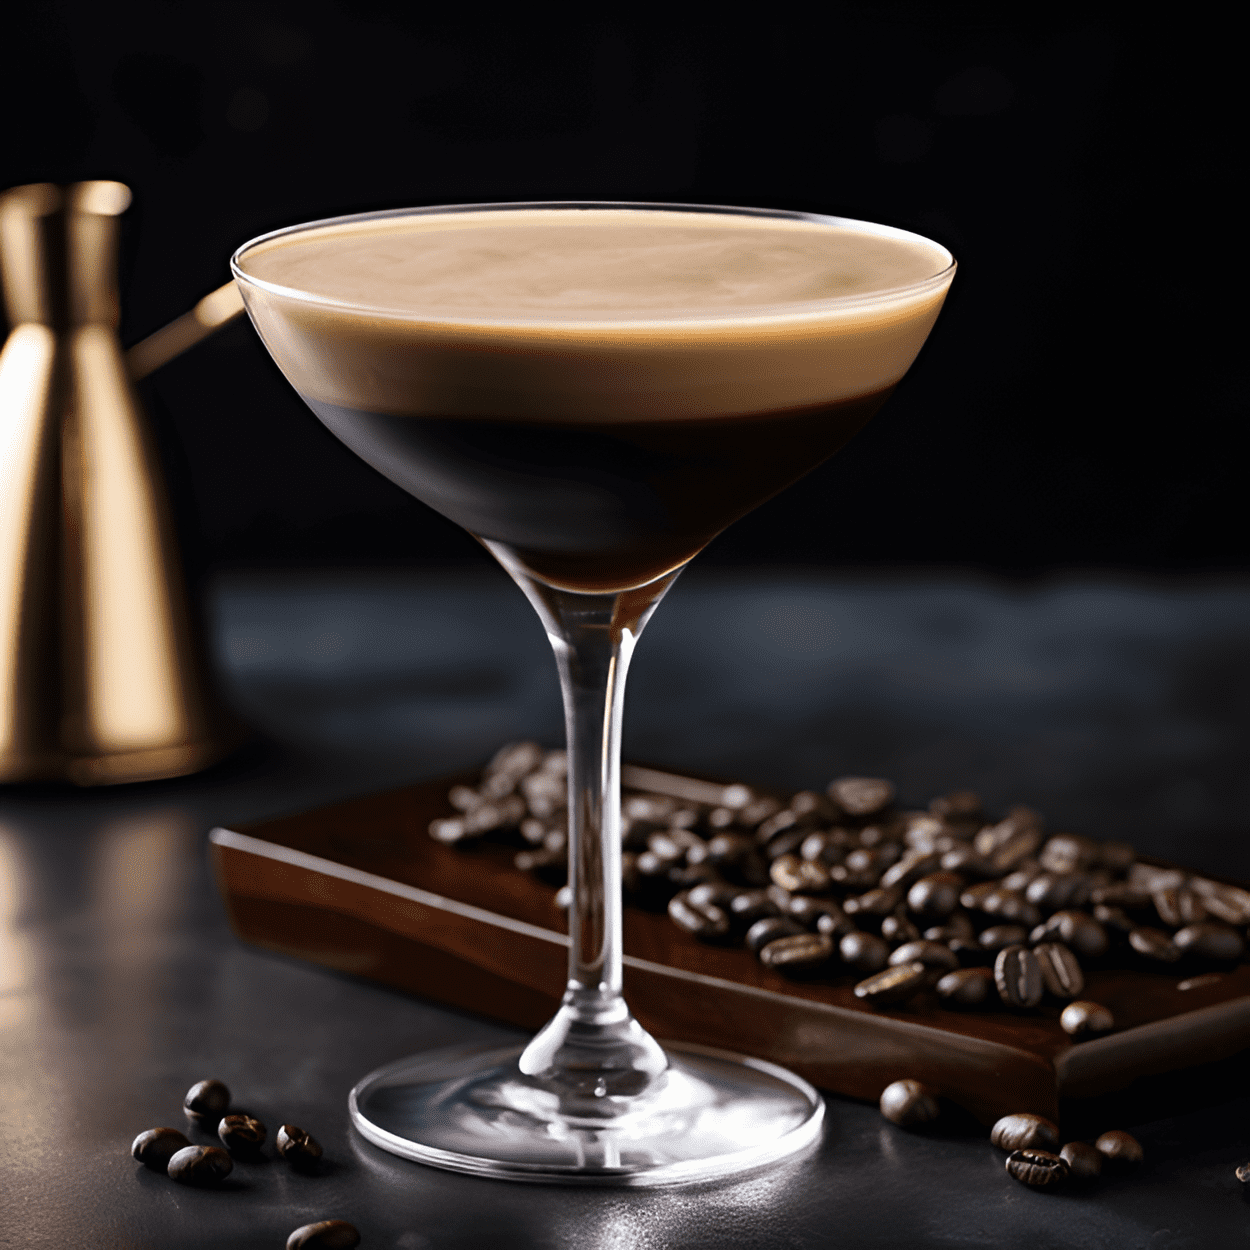 The Espresso Martini is a rich, velvety, and slightly sweet cocktail with a strong coffee flavor and a hint of bitterness. It has a creamy texture and a frothy top, making it a luxurious and indulgent drink.